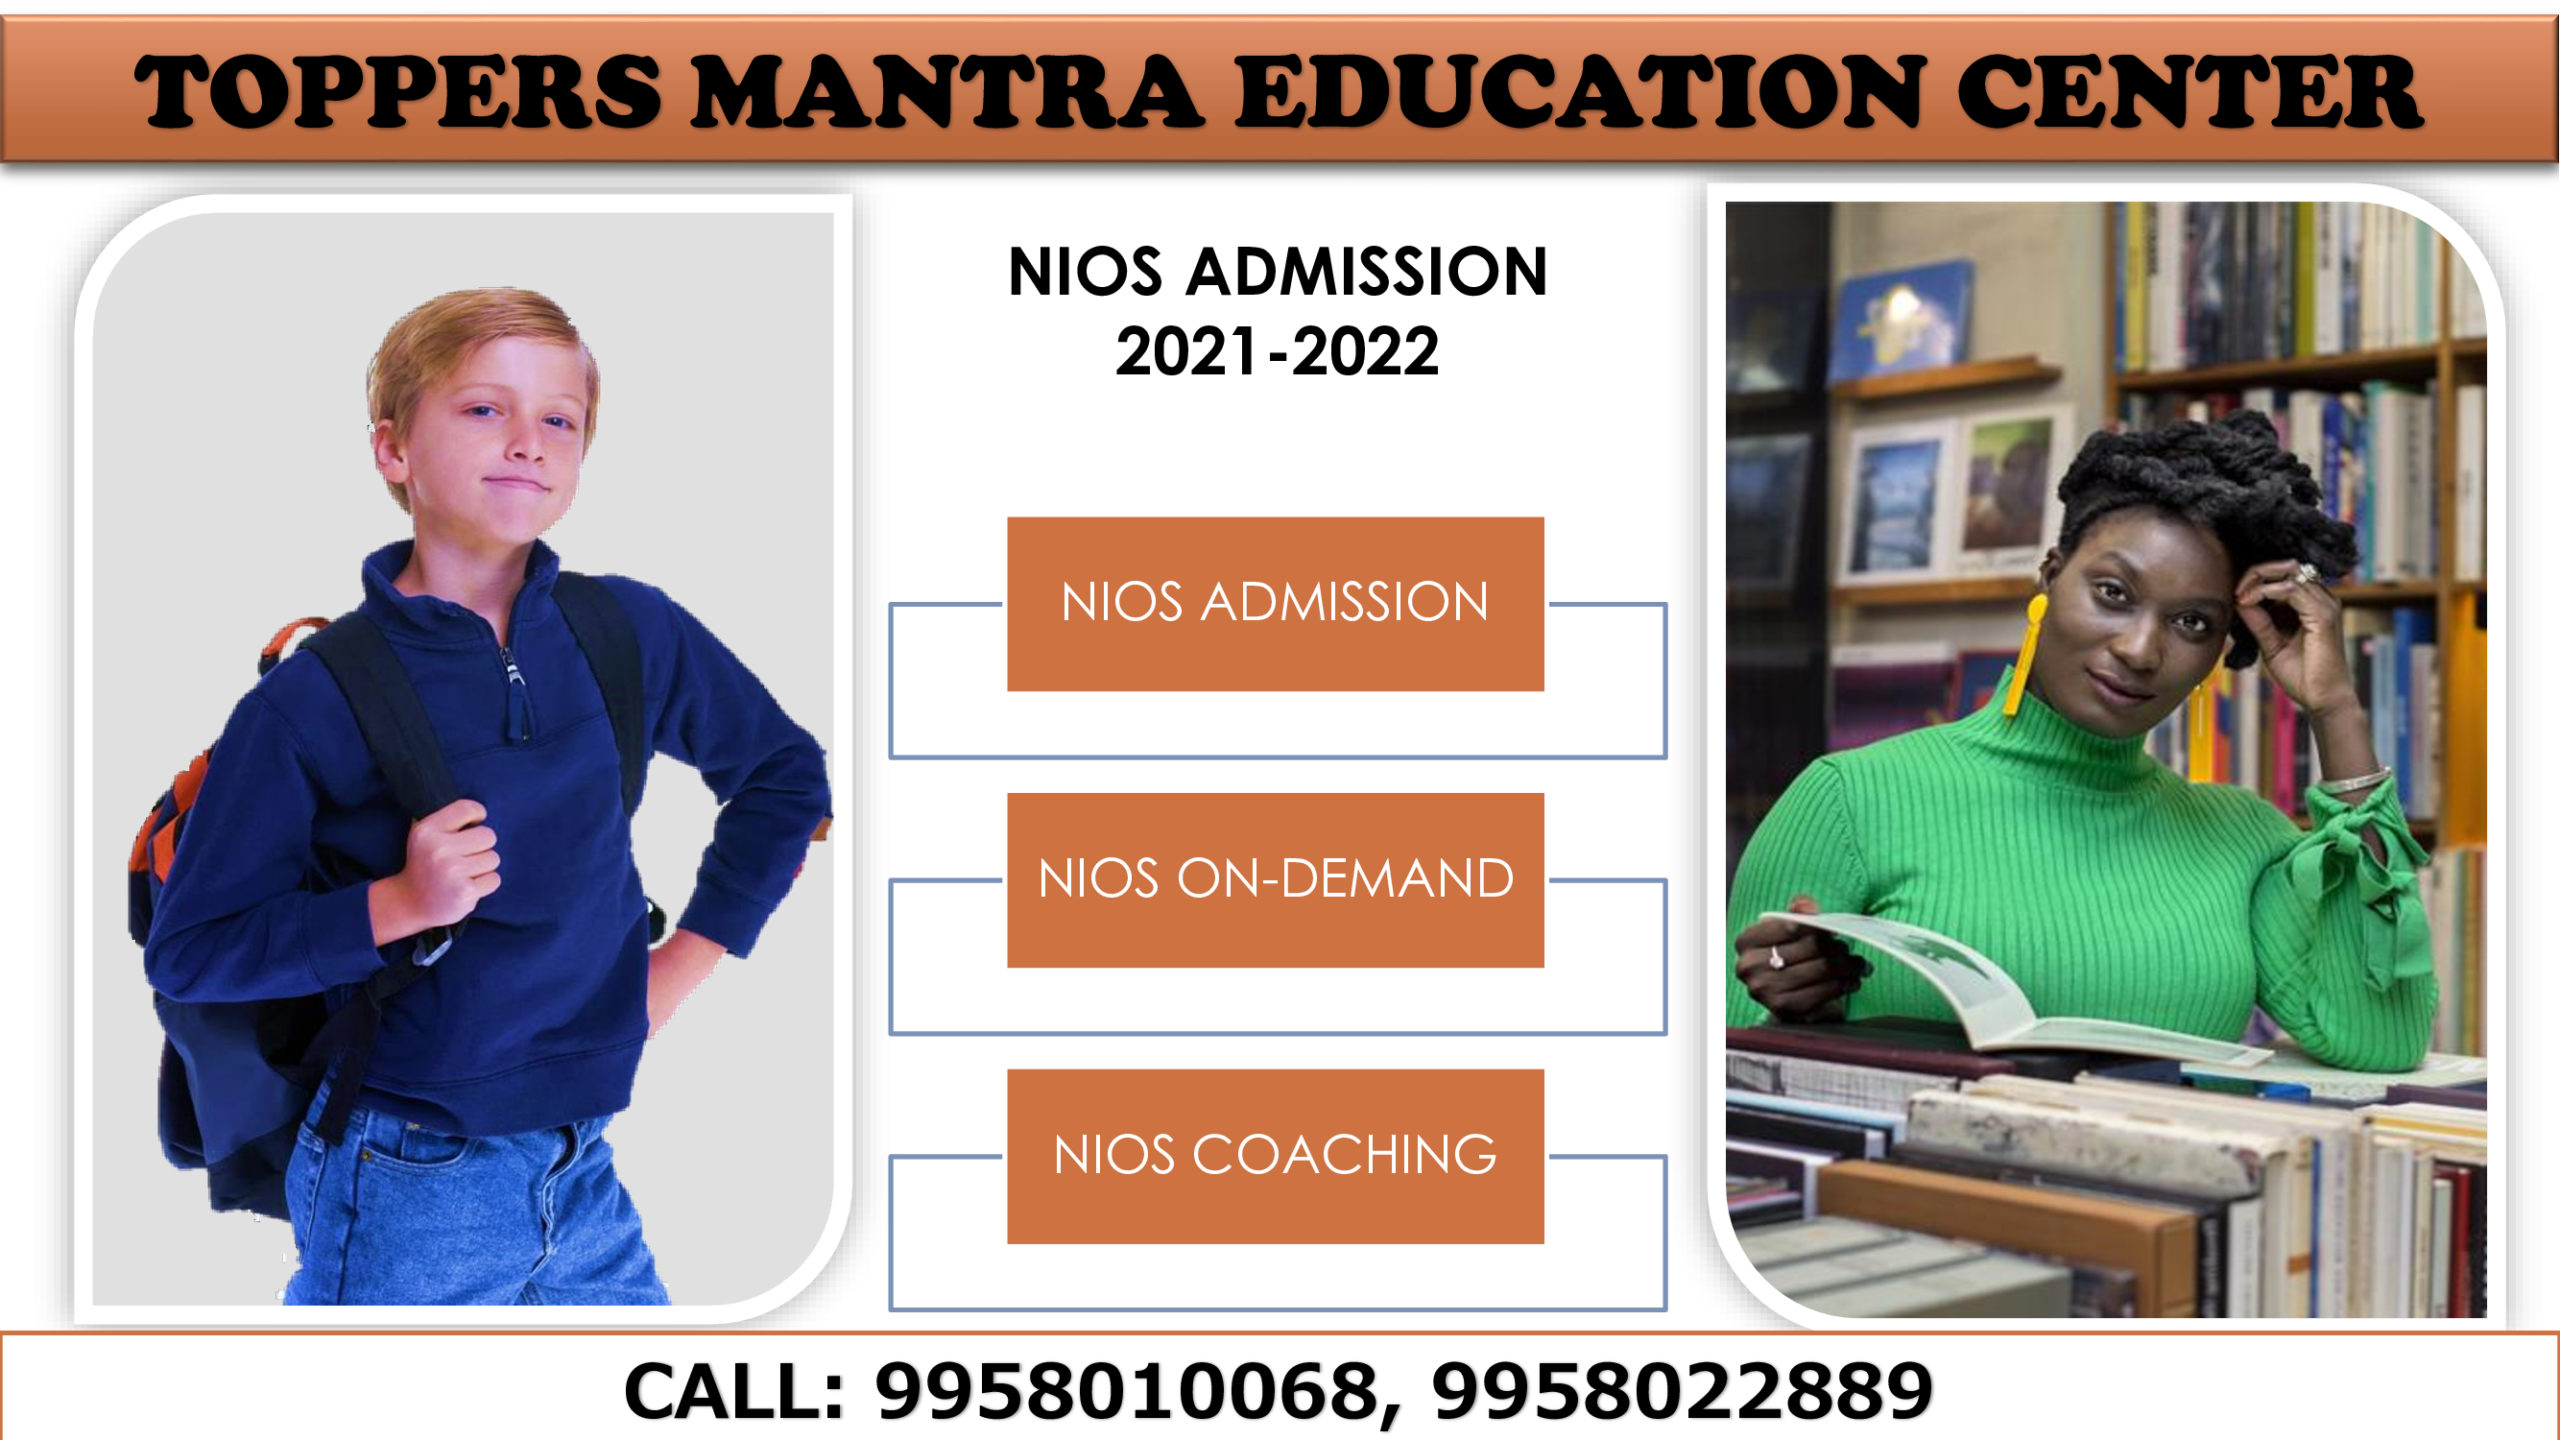 nios-admission-assam-toppers-mantra-education-center